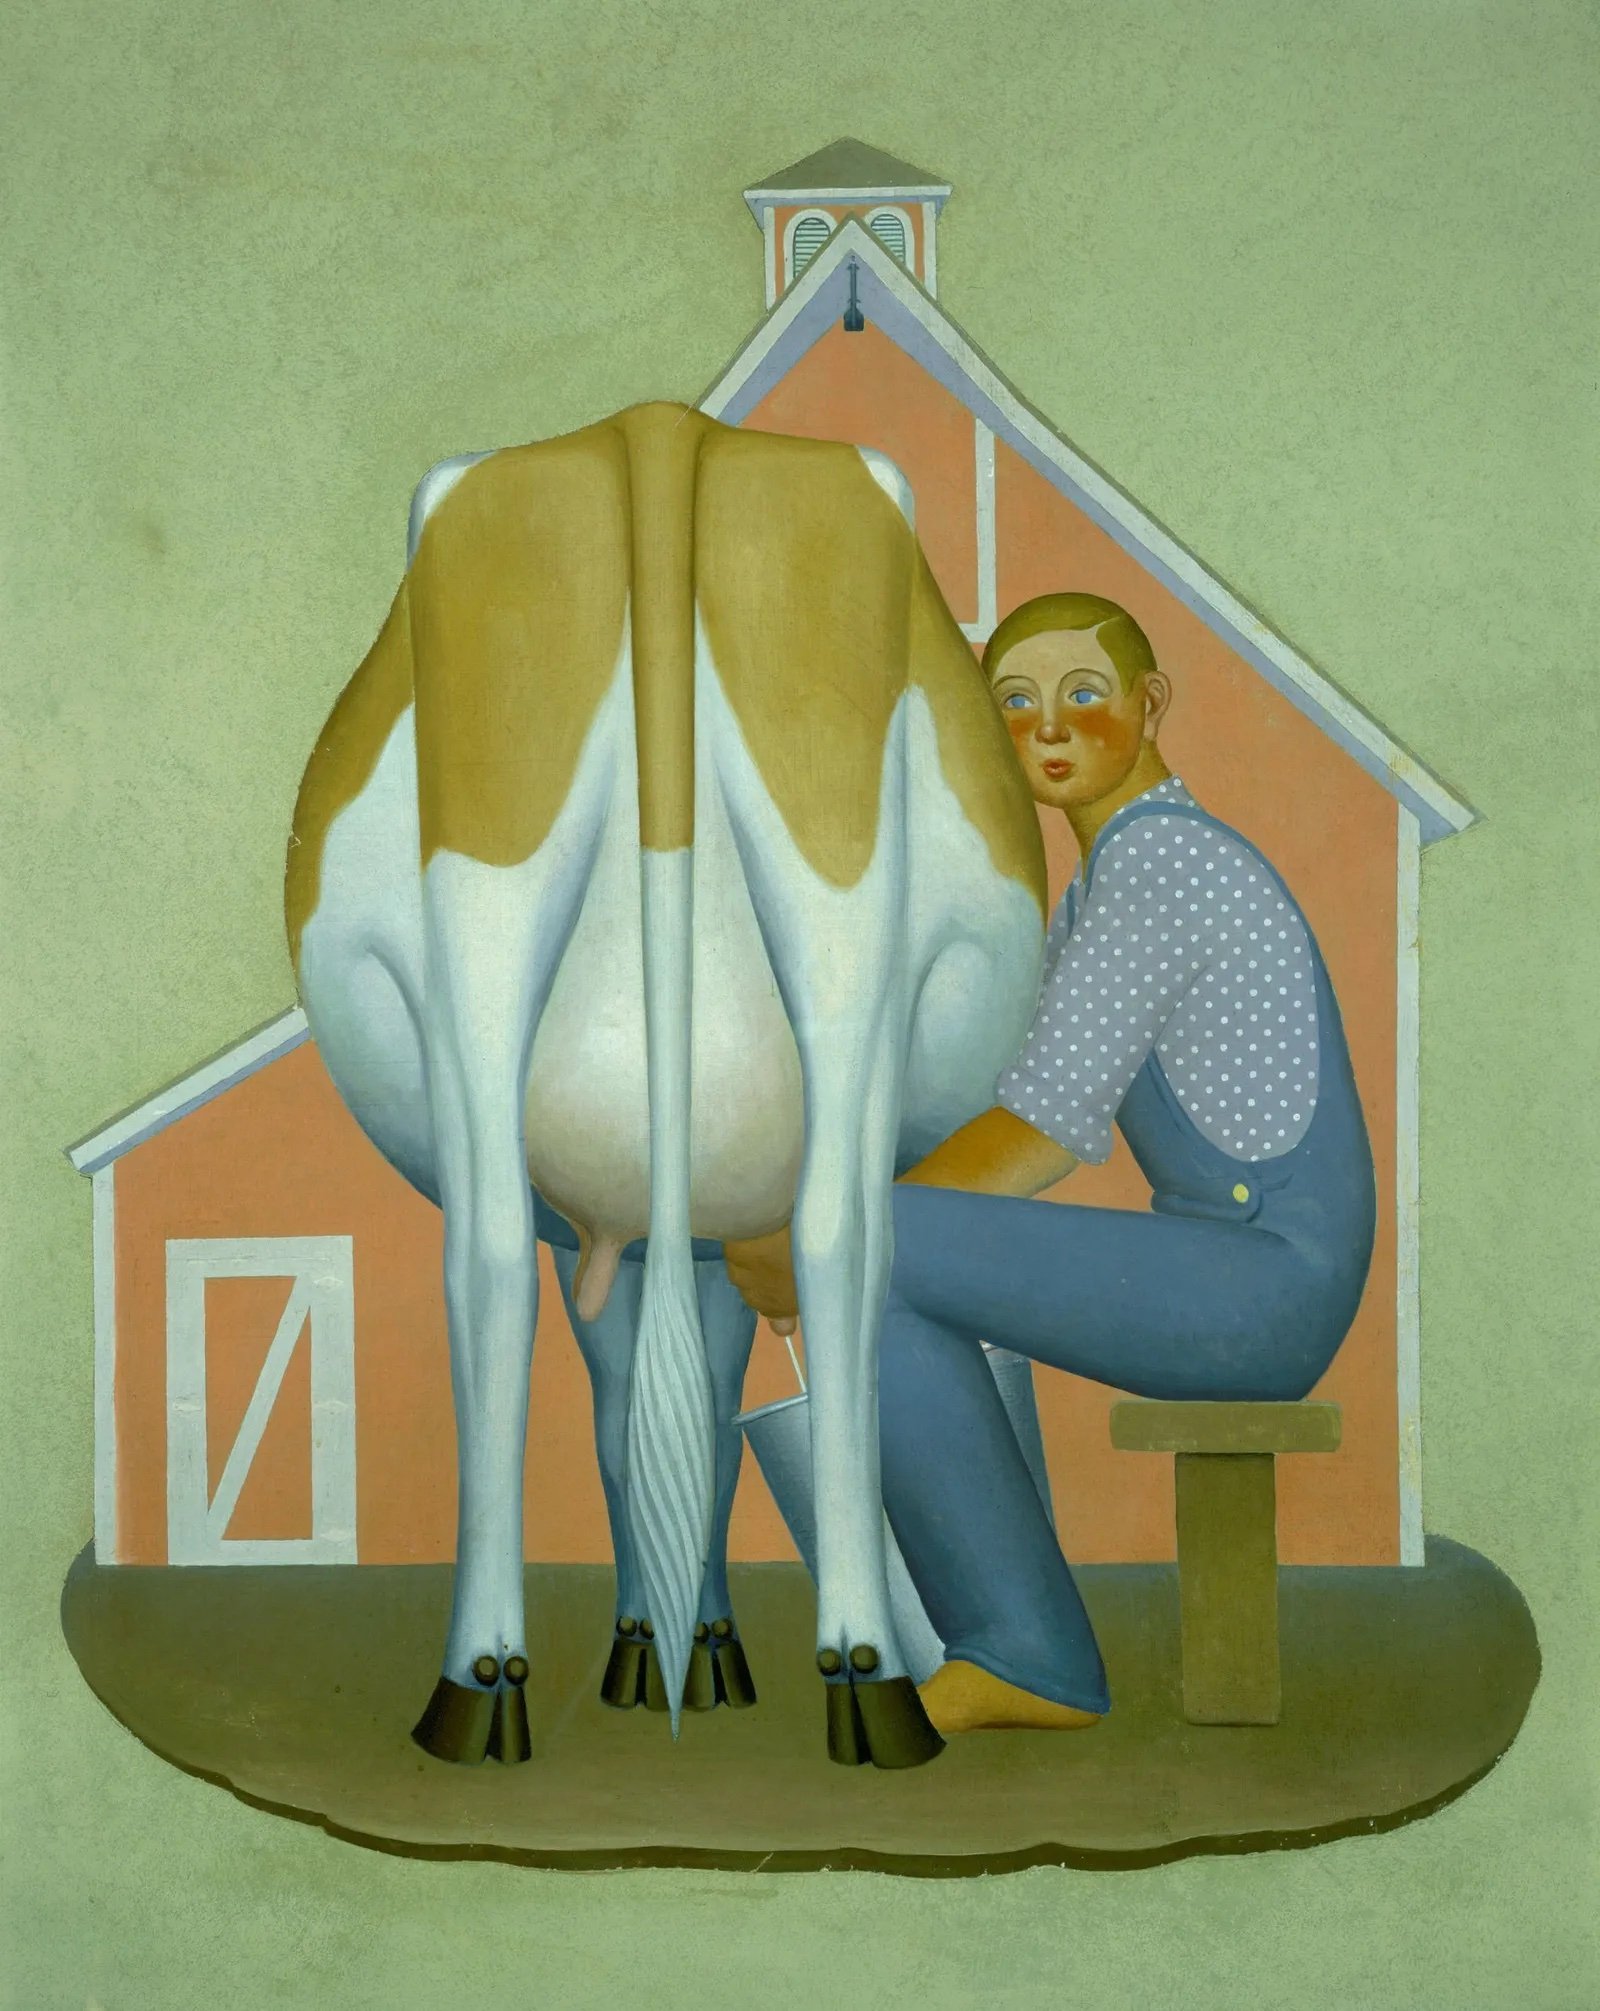 This painting portrays a young boy in overalls milking a brown and white cow, a common rural task. The boy is kneeling on a stool next to the cow, his hands working methodically. The cow stands placidly, suggesting a sense of mutual trust and familiarity between the two. Behind them, a traditional barn rises, its presence reinforcing the rural setting. The painting, dominated by earthy tones, captures a quiet moment of everyday farm life, evoking a sense of harmony between humans and nature in the rural Midwest.